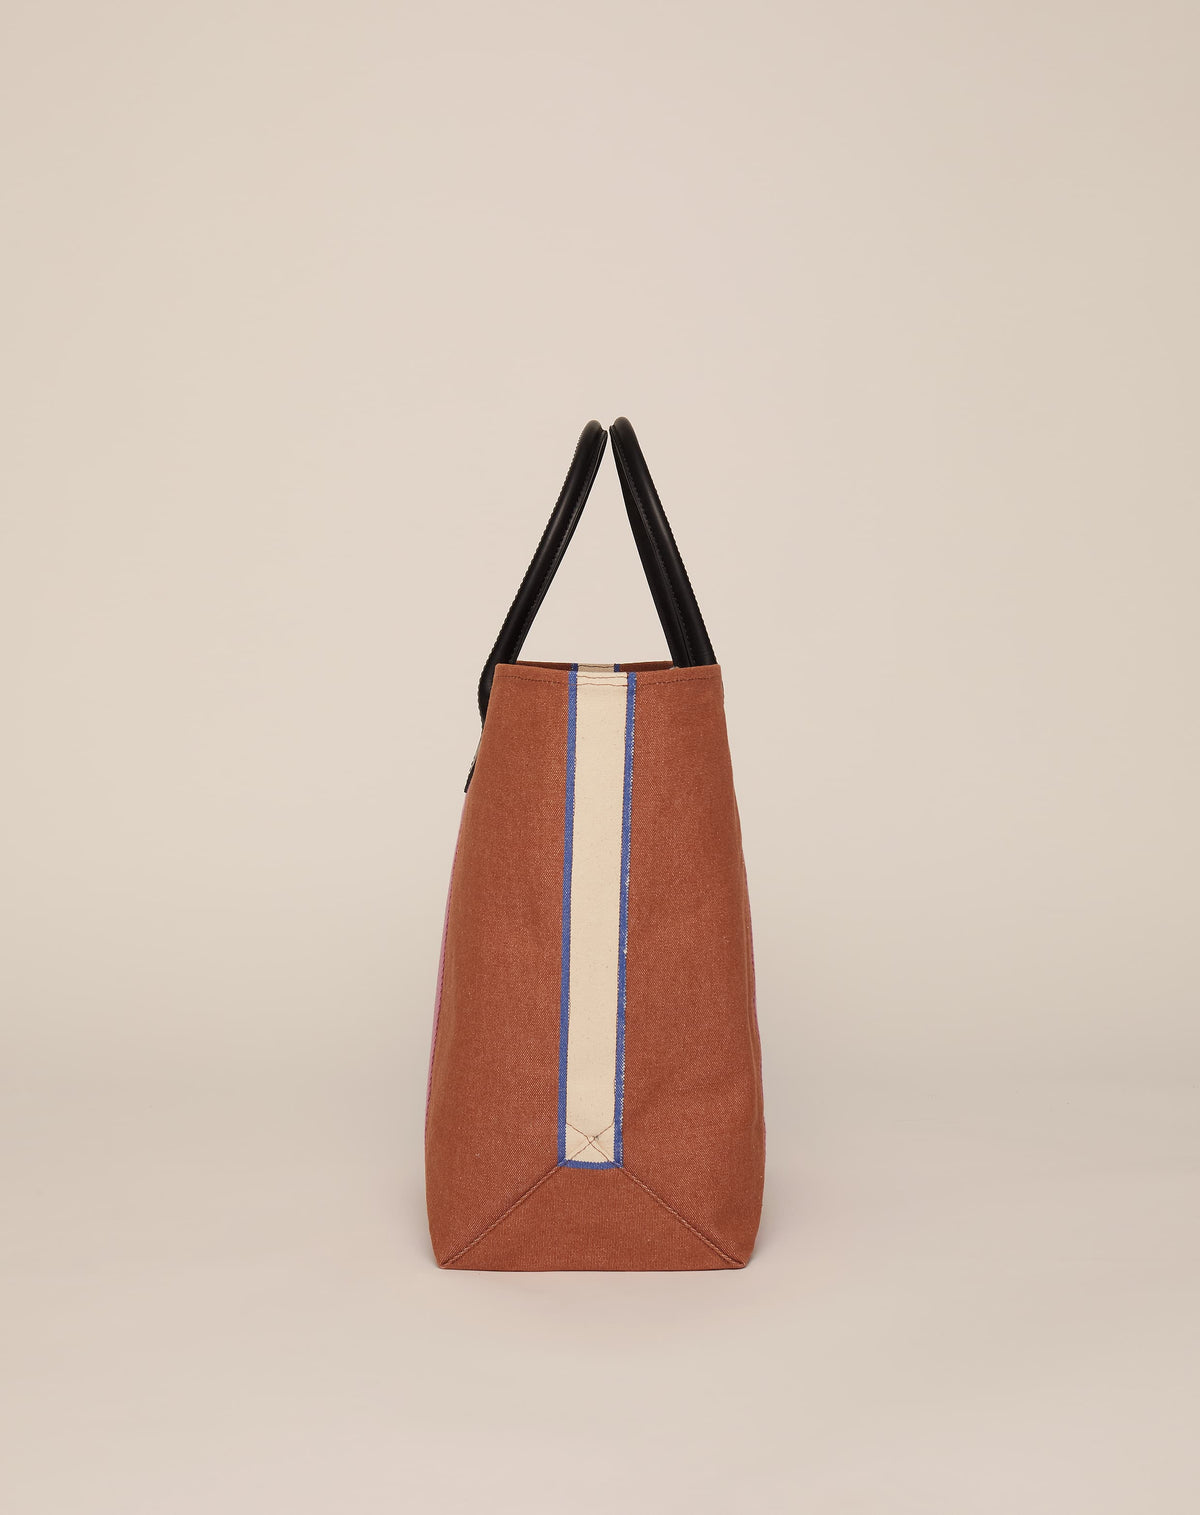 Medium Utility Tote - Tan with Dusty Pink Webbing